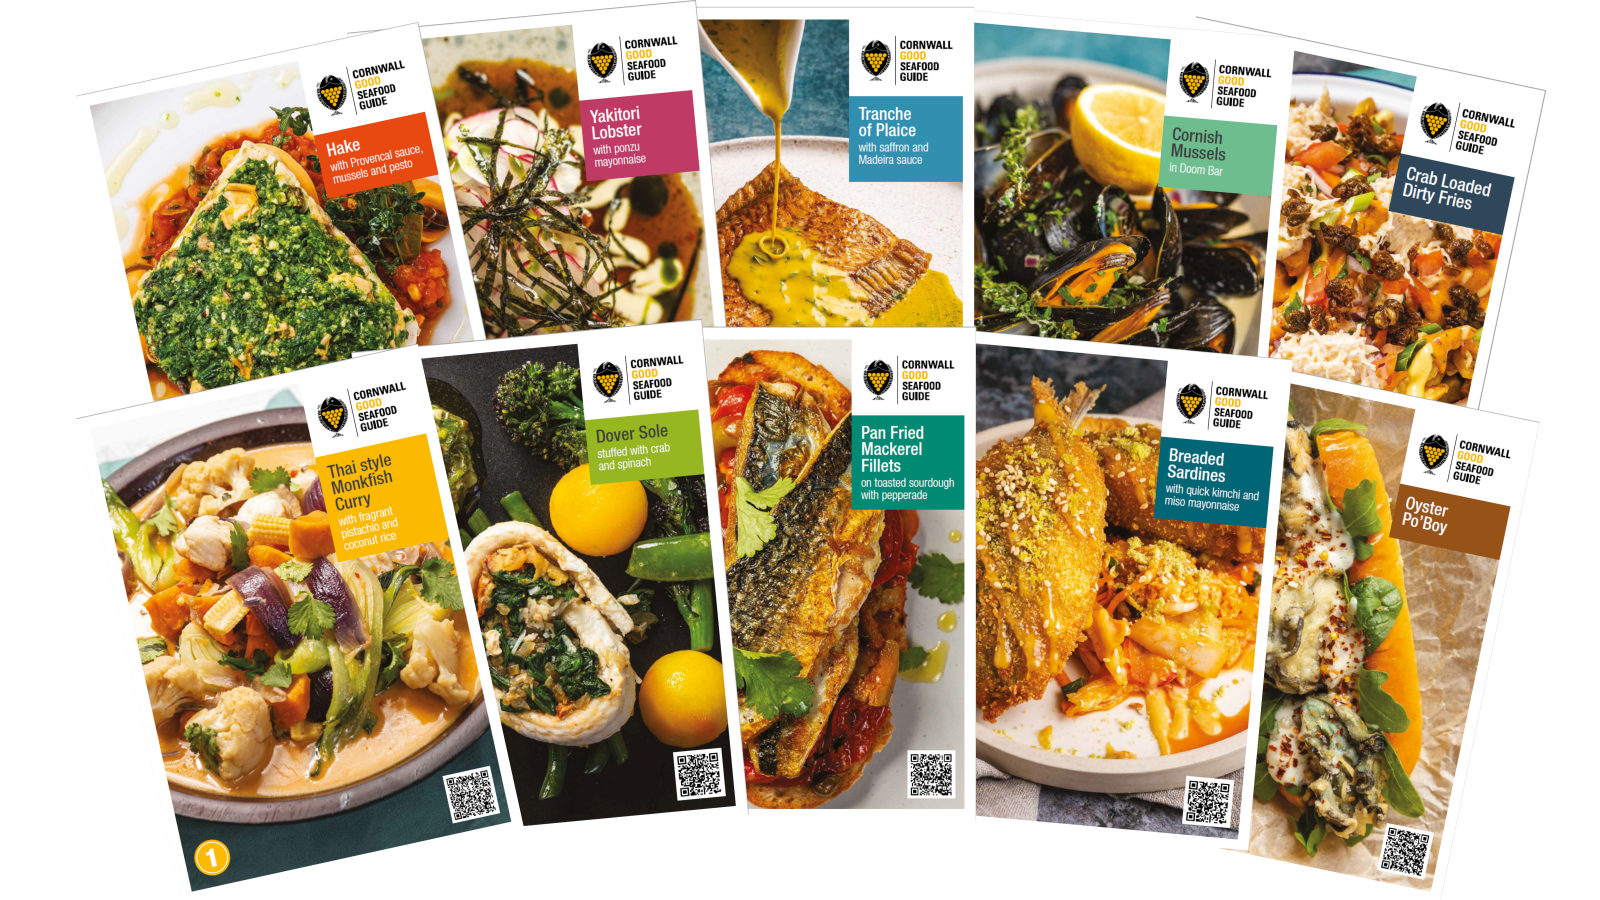 https://www.cornwallgoodseafoodguide.org.uk/documents/images/Recipe%20cards/Twitter%20recipe%20cards.png